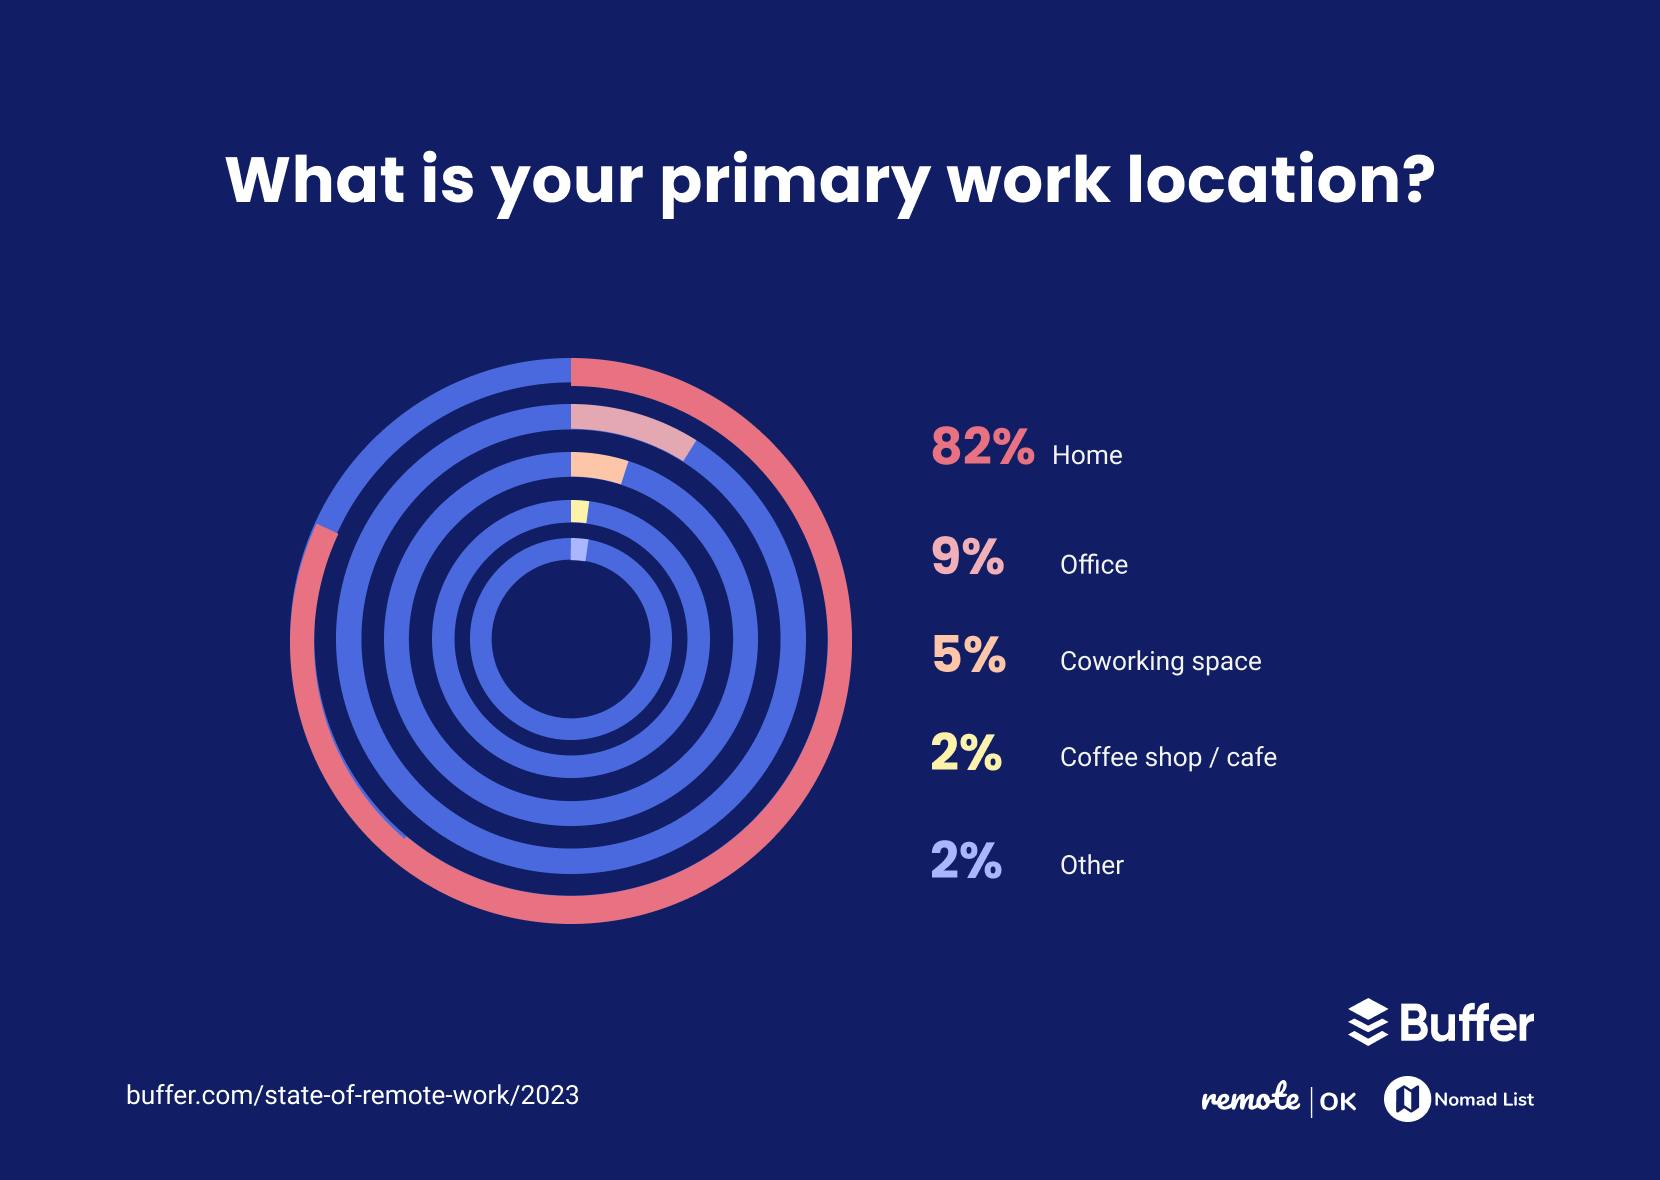 Remote working: Is the trend over?